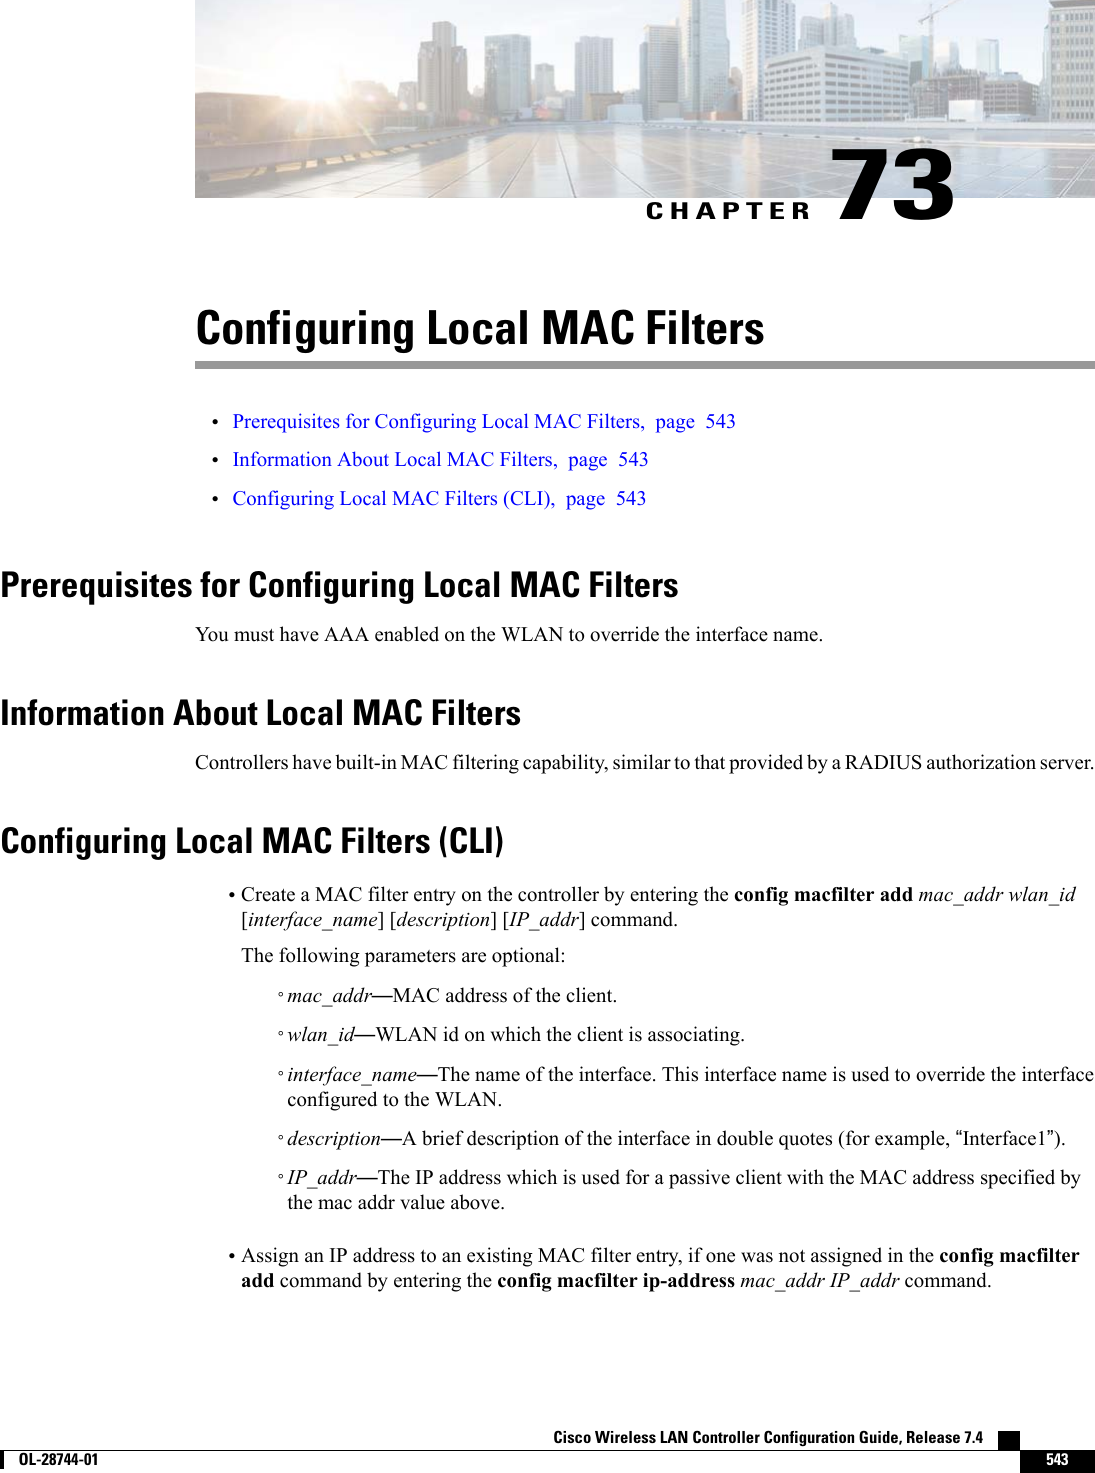 CHAPTER 73Configuring Local MAC Filters•Prerequisites for Configuring Local MAC Filters, page 543•Information About Local MAC Filters, page 543•Configuring Local MAC Filters (CLI), page 543Prerequisites for Configuring Local MAC FiltersYou must have AAA enabled on the WLAN to override the interface name.Information About Local MAC FiltersControllers have built-in MAC filtering capability, similar to that provided by a RADIUS authorization server.Configuring Local MAC Filters (CLI)•Create a MAC filter entry on the controller by entering the config macfilter add mac_addr wlan_id[interface_name] [description] [IP_addr] command.The following parameters are optional:◦mac_addr—MAC address of the client.◦wlan_id—WLAN id on which the client is associating.◦interface_name—The name of the interface. This interface name is used to override the interfaceconfigured to the WLAN.◦description—A brief description of the interface in double quotes (for example, “Interface1”).◦IP_addr—The IP address which is used for a passive client with the MAC address specified bythe mac addr value above.•Assign an IP address to an existing MAC filter entry, if one was not assigned in the config macfilteradd command by entering the config macfilter ip-address mac_addr IP_addr command.Cisco Wireless LAN Controller Configuration Guide, Release 7.4        OL-28744-01 543